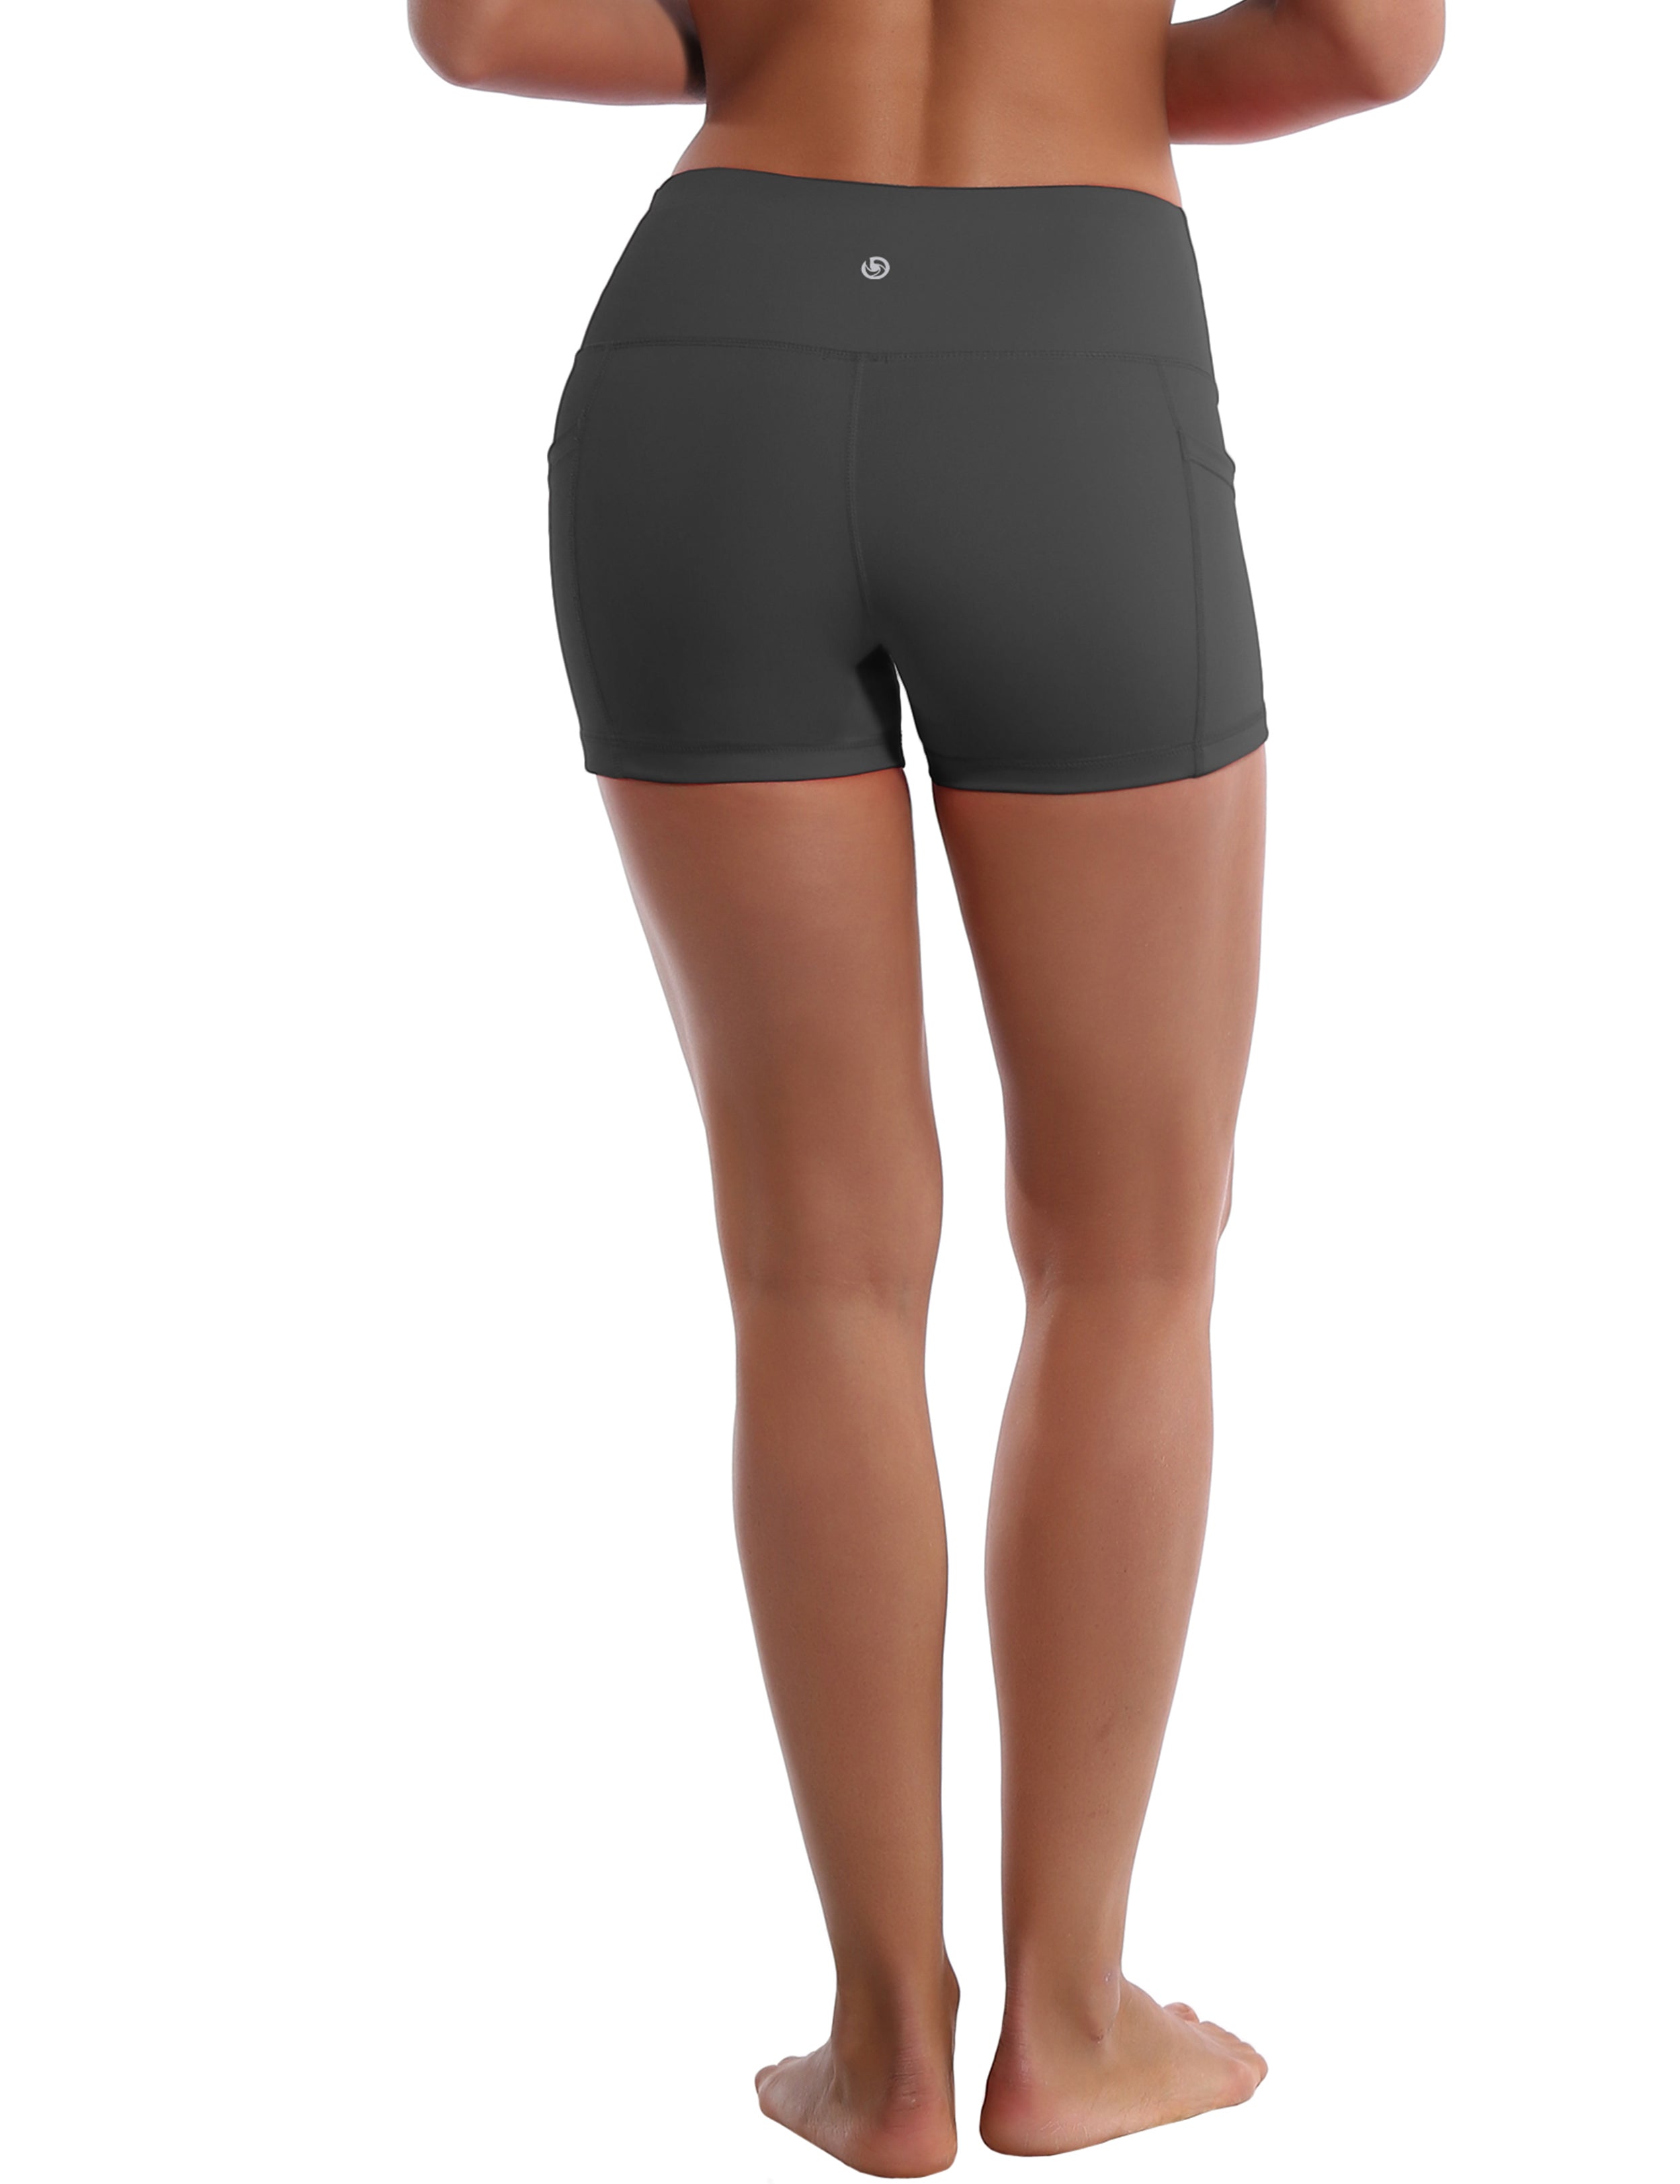 2.5" Side Pockets Jogging Shorts shadowcharcoal Sleek, soft, smooth and totally comfortable: our newest sexy style is here. Softest-ever fabric High elasticity High density 4-way stretch Fabric doesn't attract lint easily No see-through Moisture-wicking Machine wash 78% Polyester, 22% Spandex